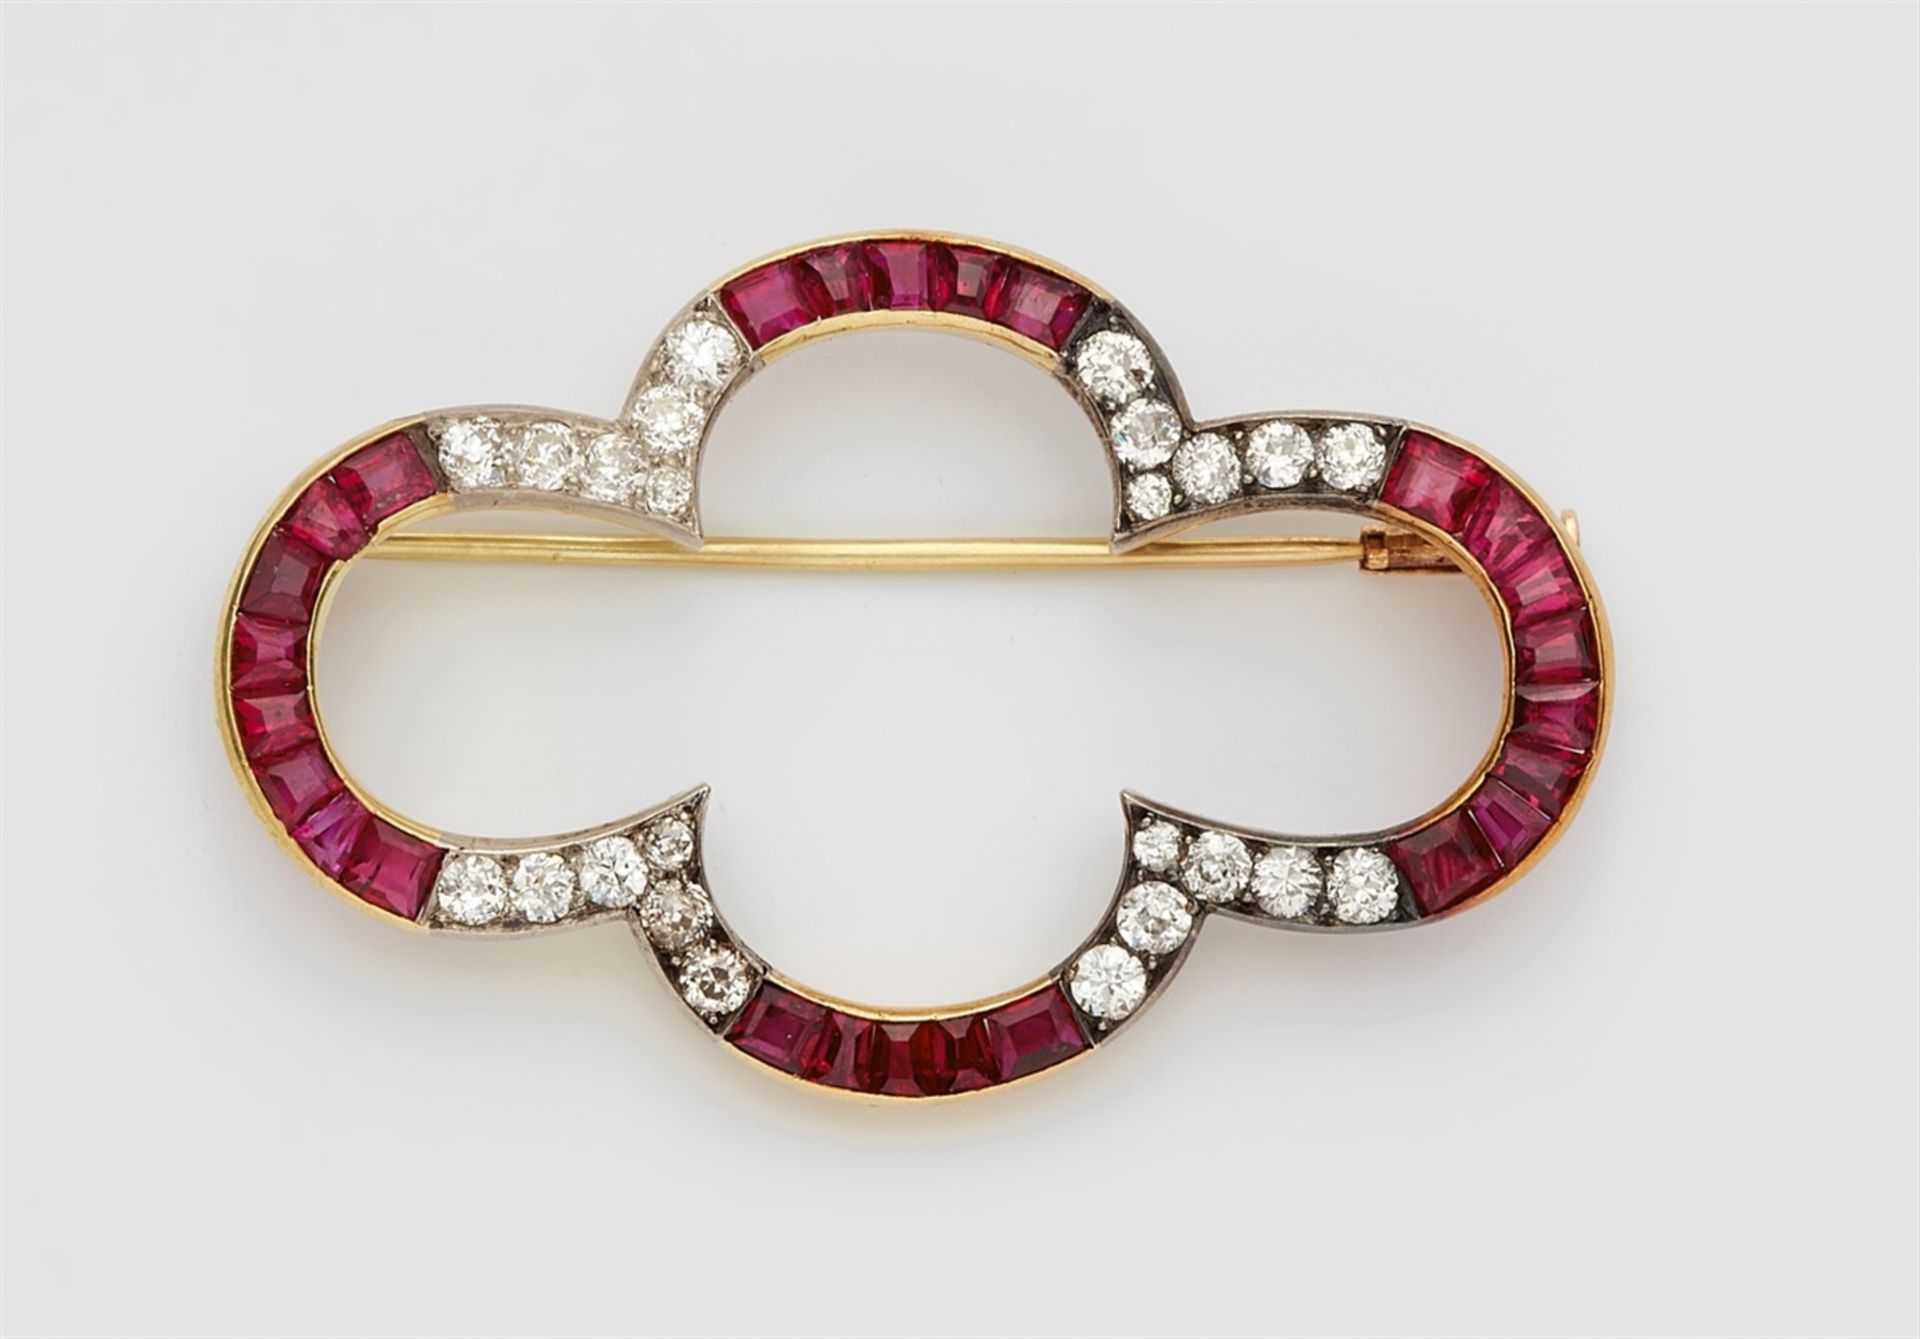 An 18k gold, diamond and ruby broochPierced quatrefoil form set with 26 calibrated natural rubies (